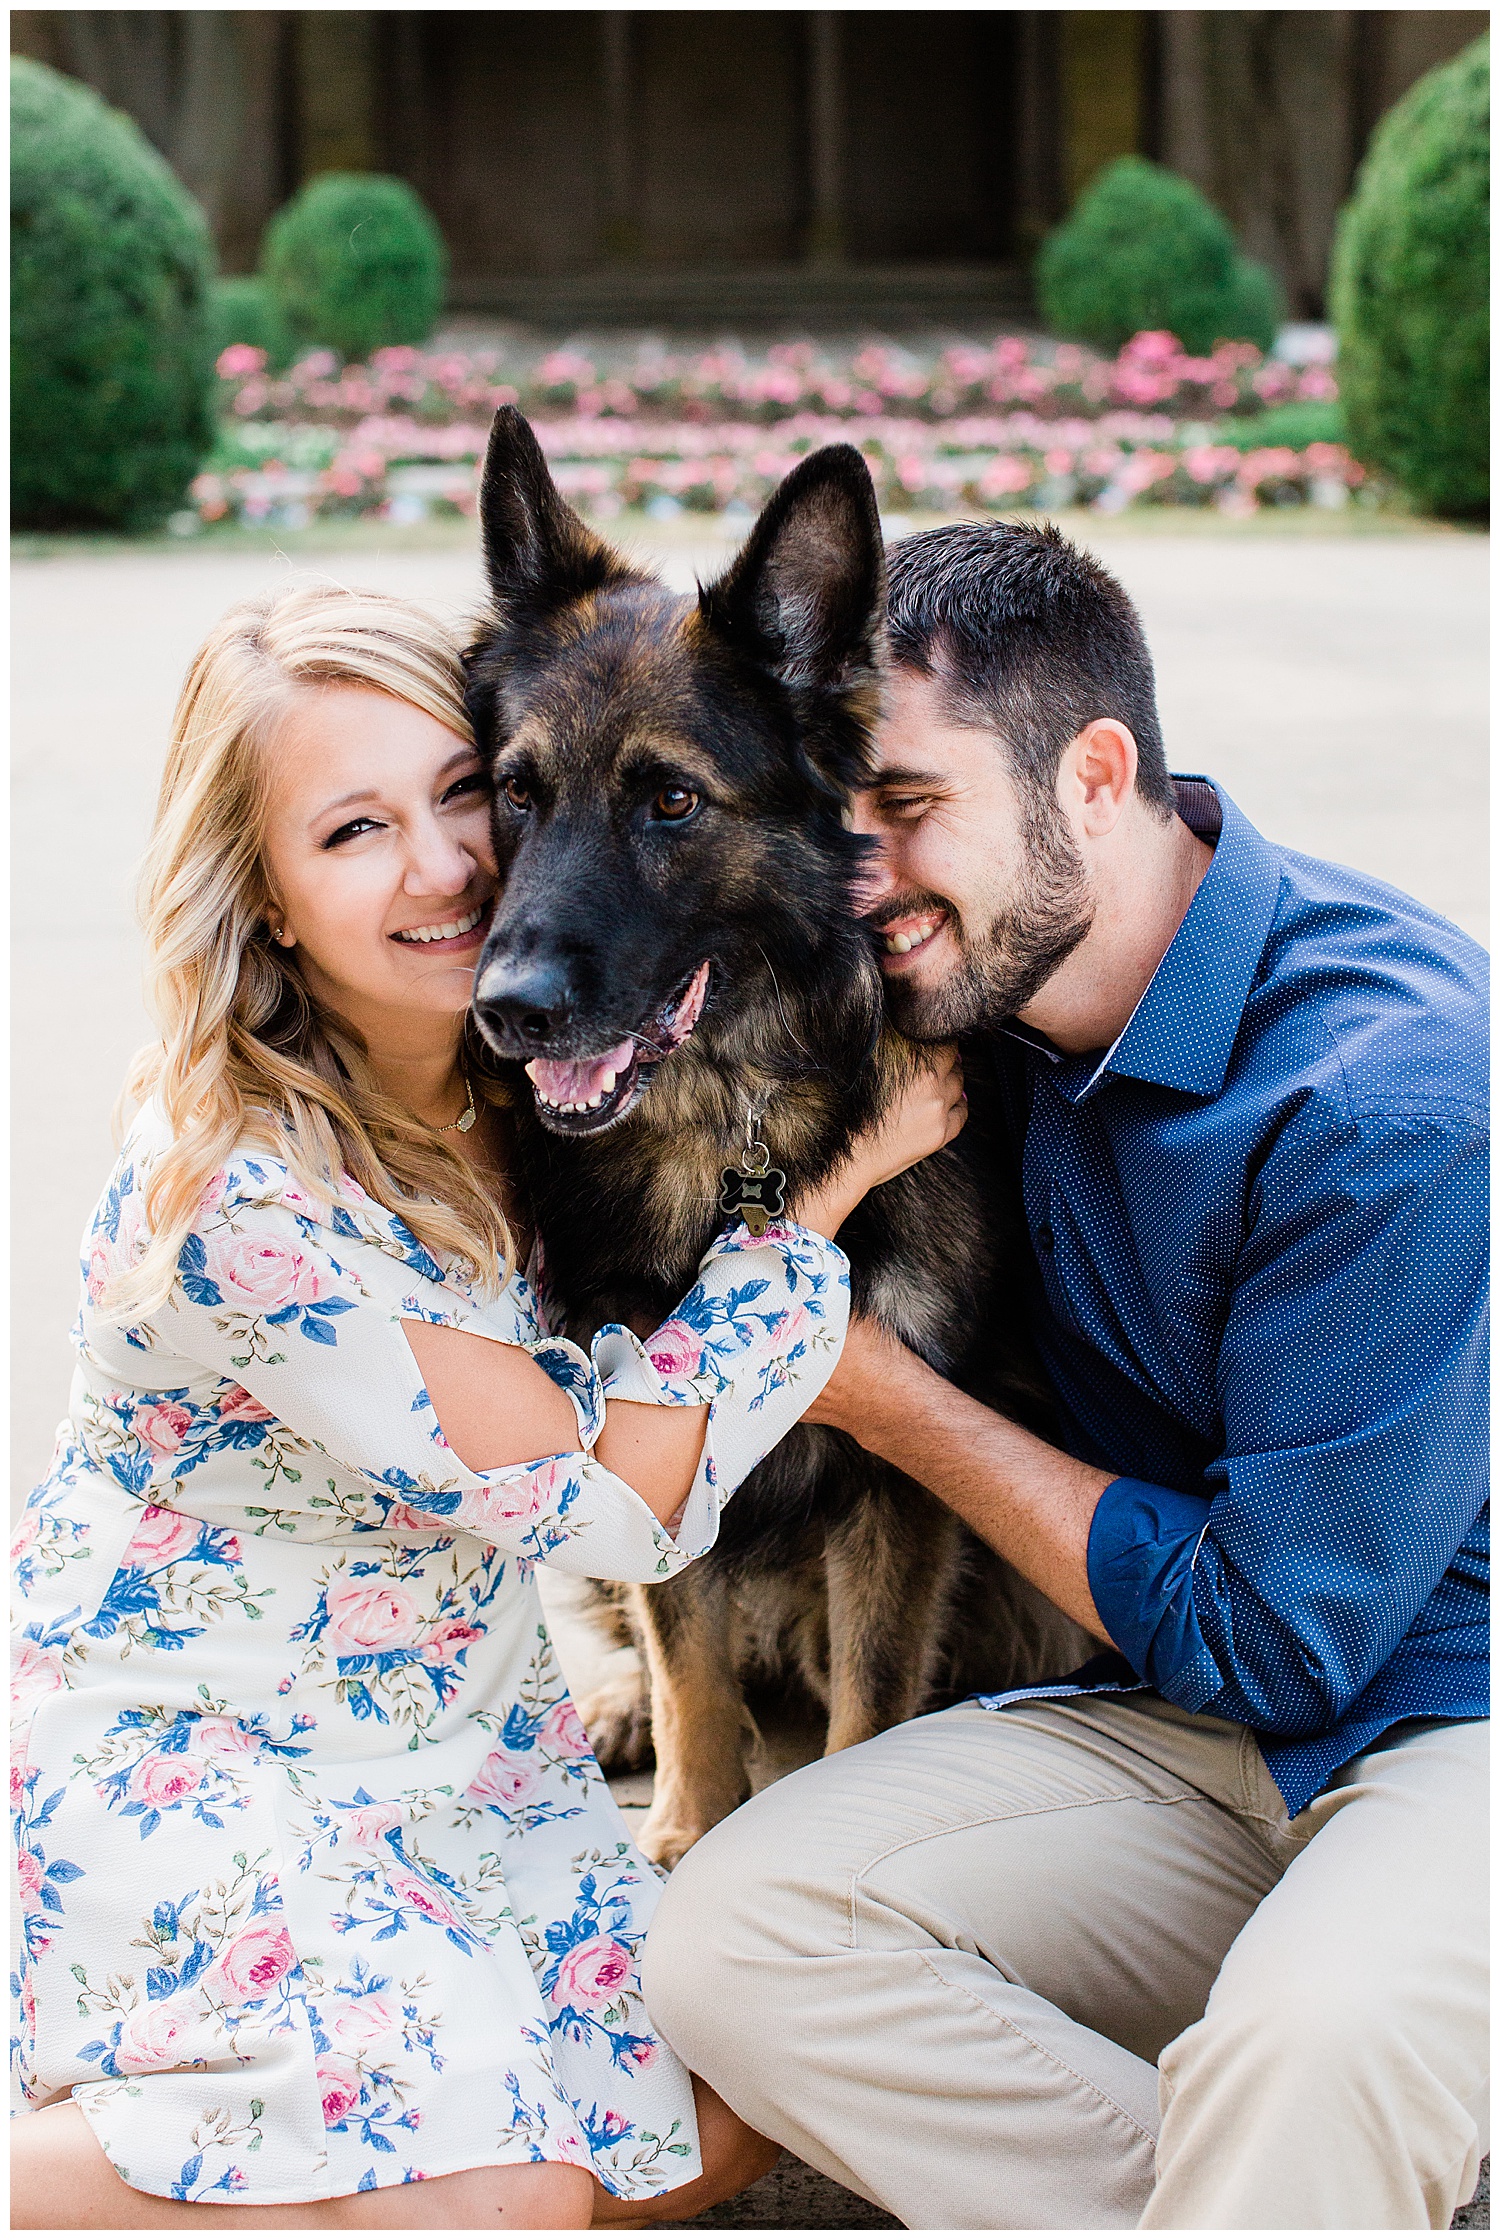 Couple snuggle their dog while laughing together